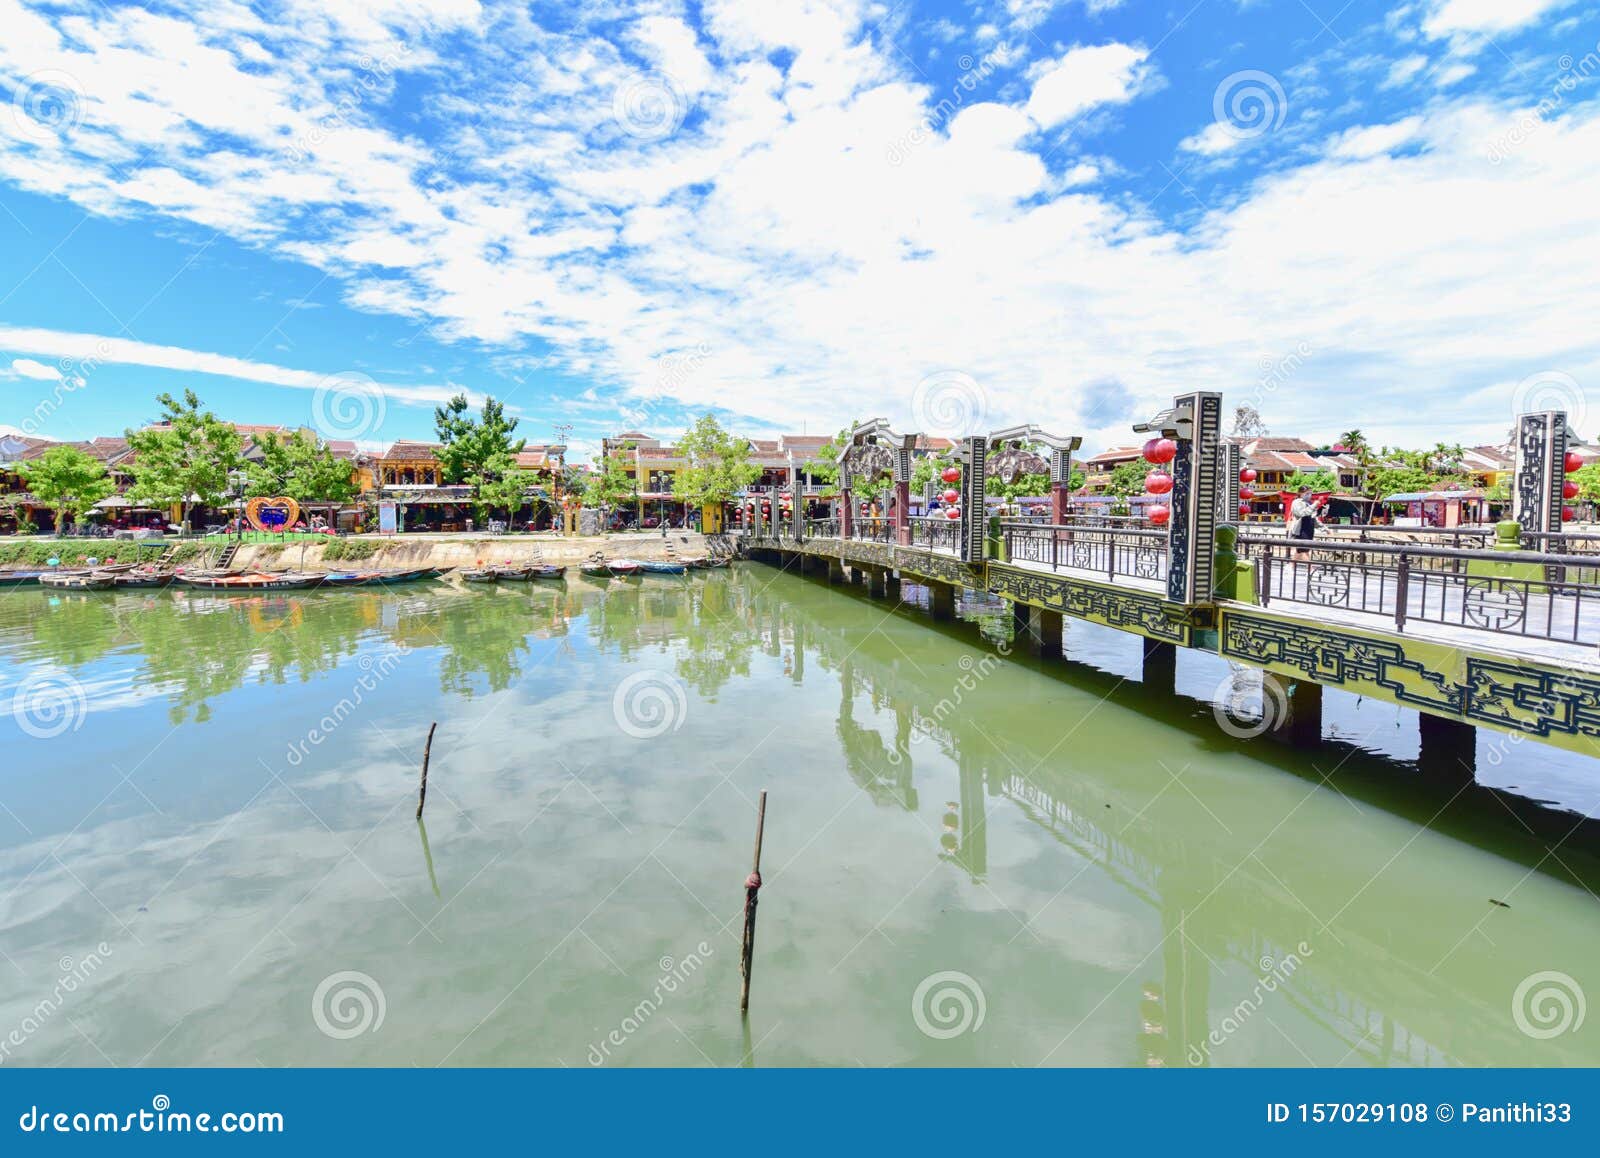 Trading Port With Crossing Bridge Of Hoi An Ancient Town Editorial Stock Photo Image Of Crossing Nature